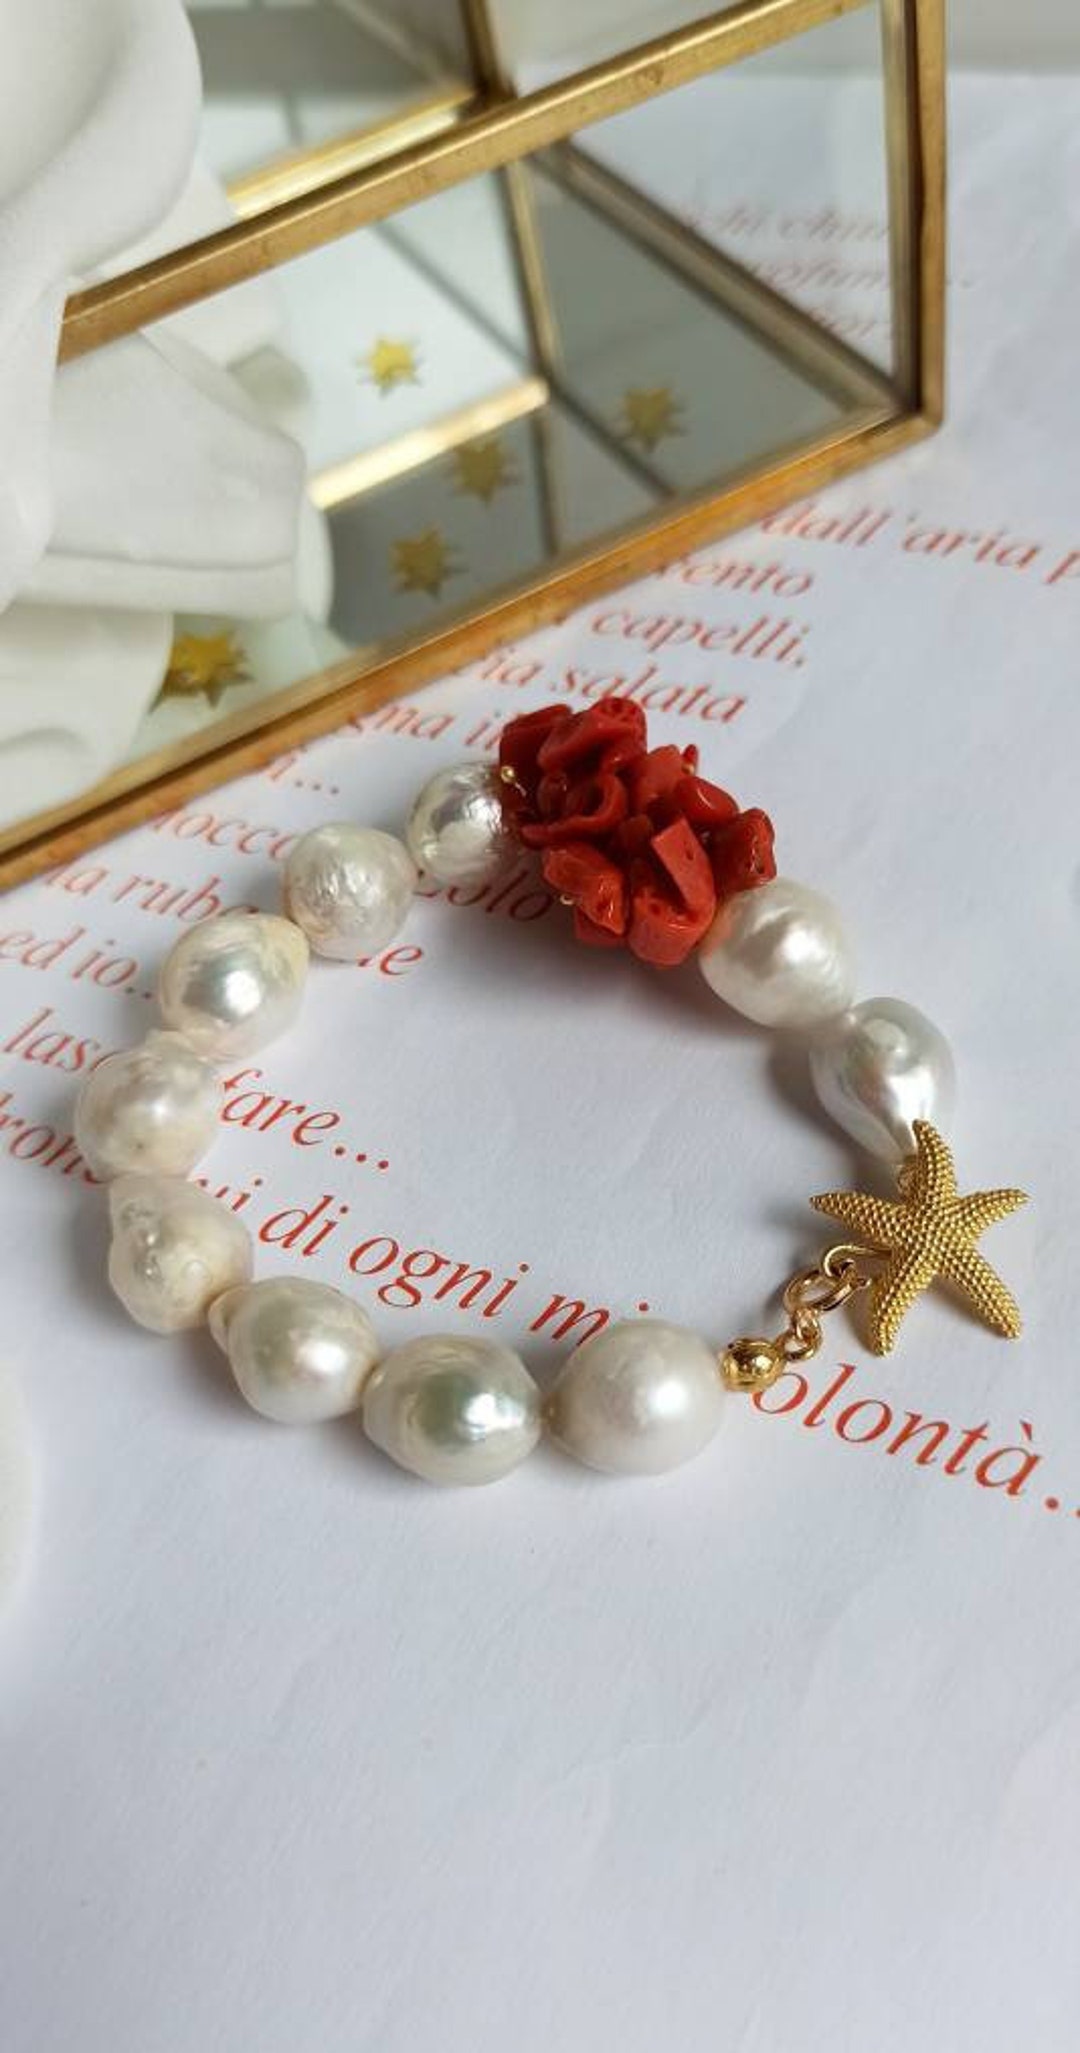 How to make a knotted pearl bracelet - YouTube